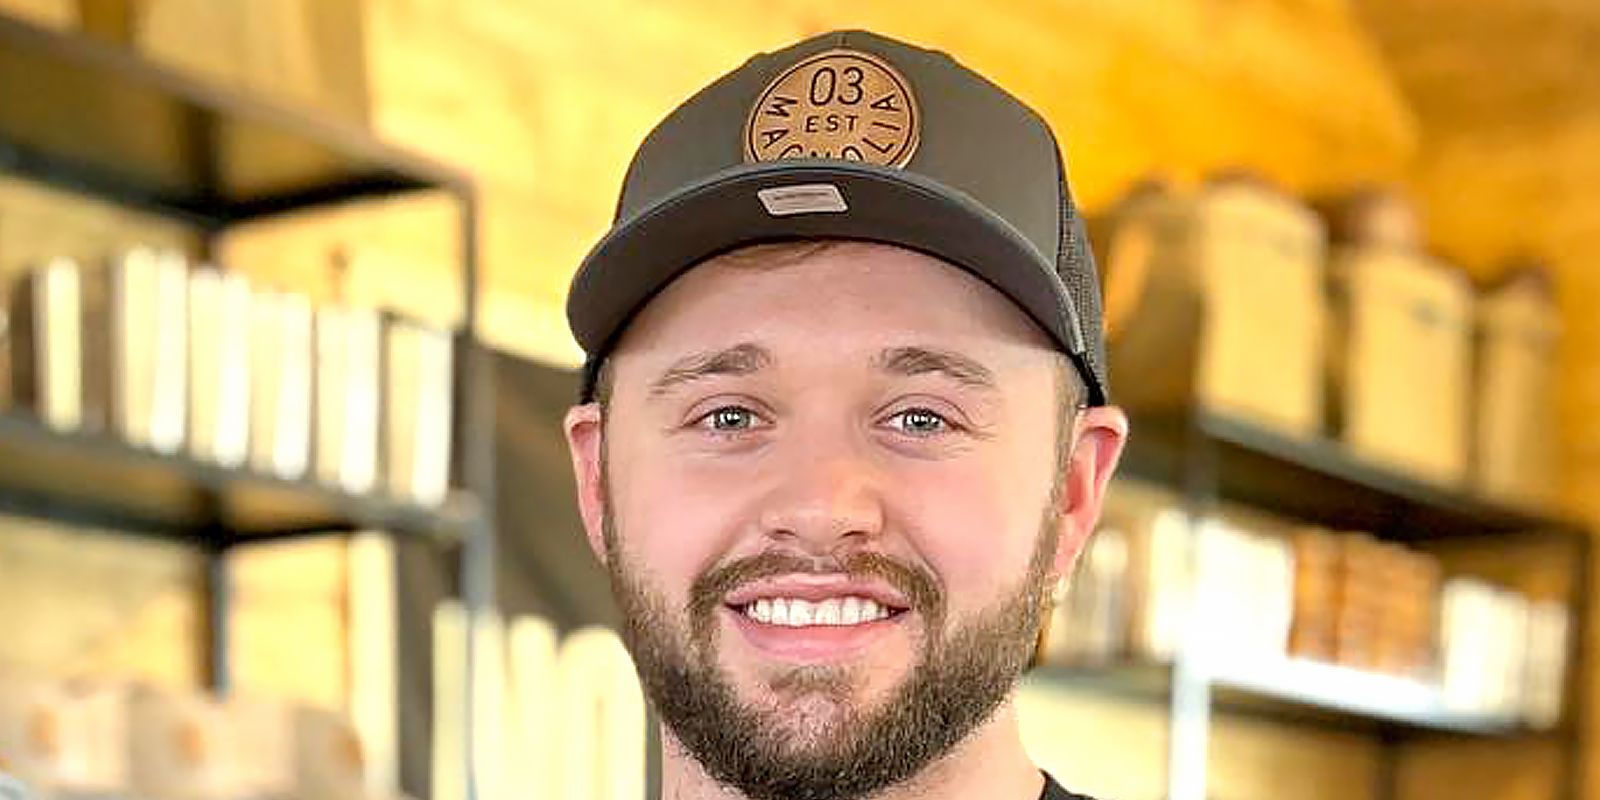 Jason Duggar smiling at the camera with a hat on